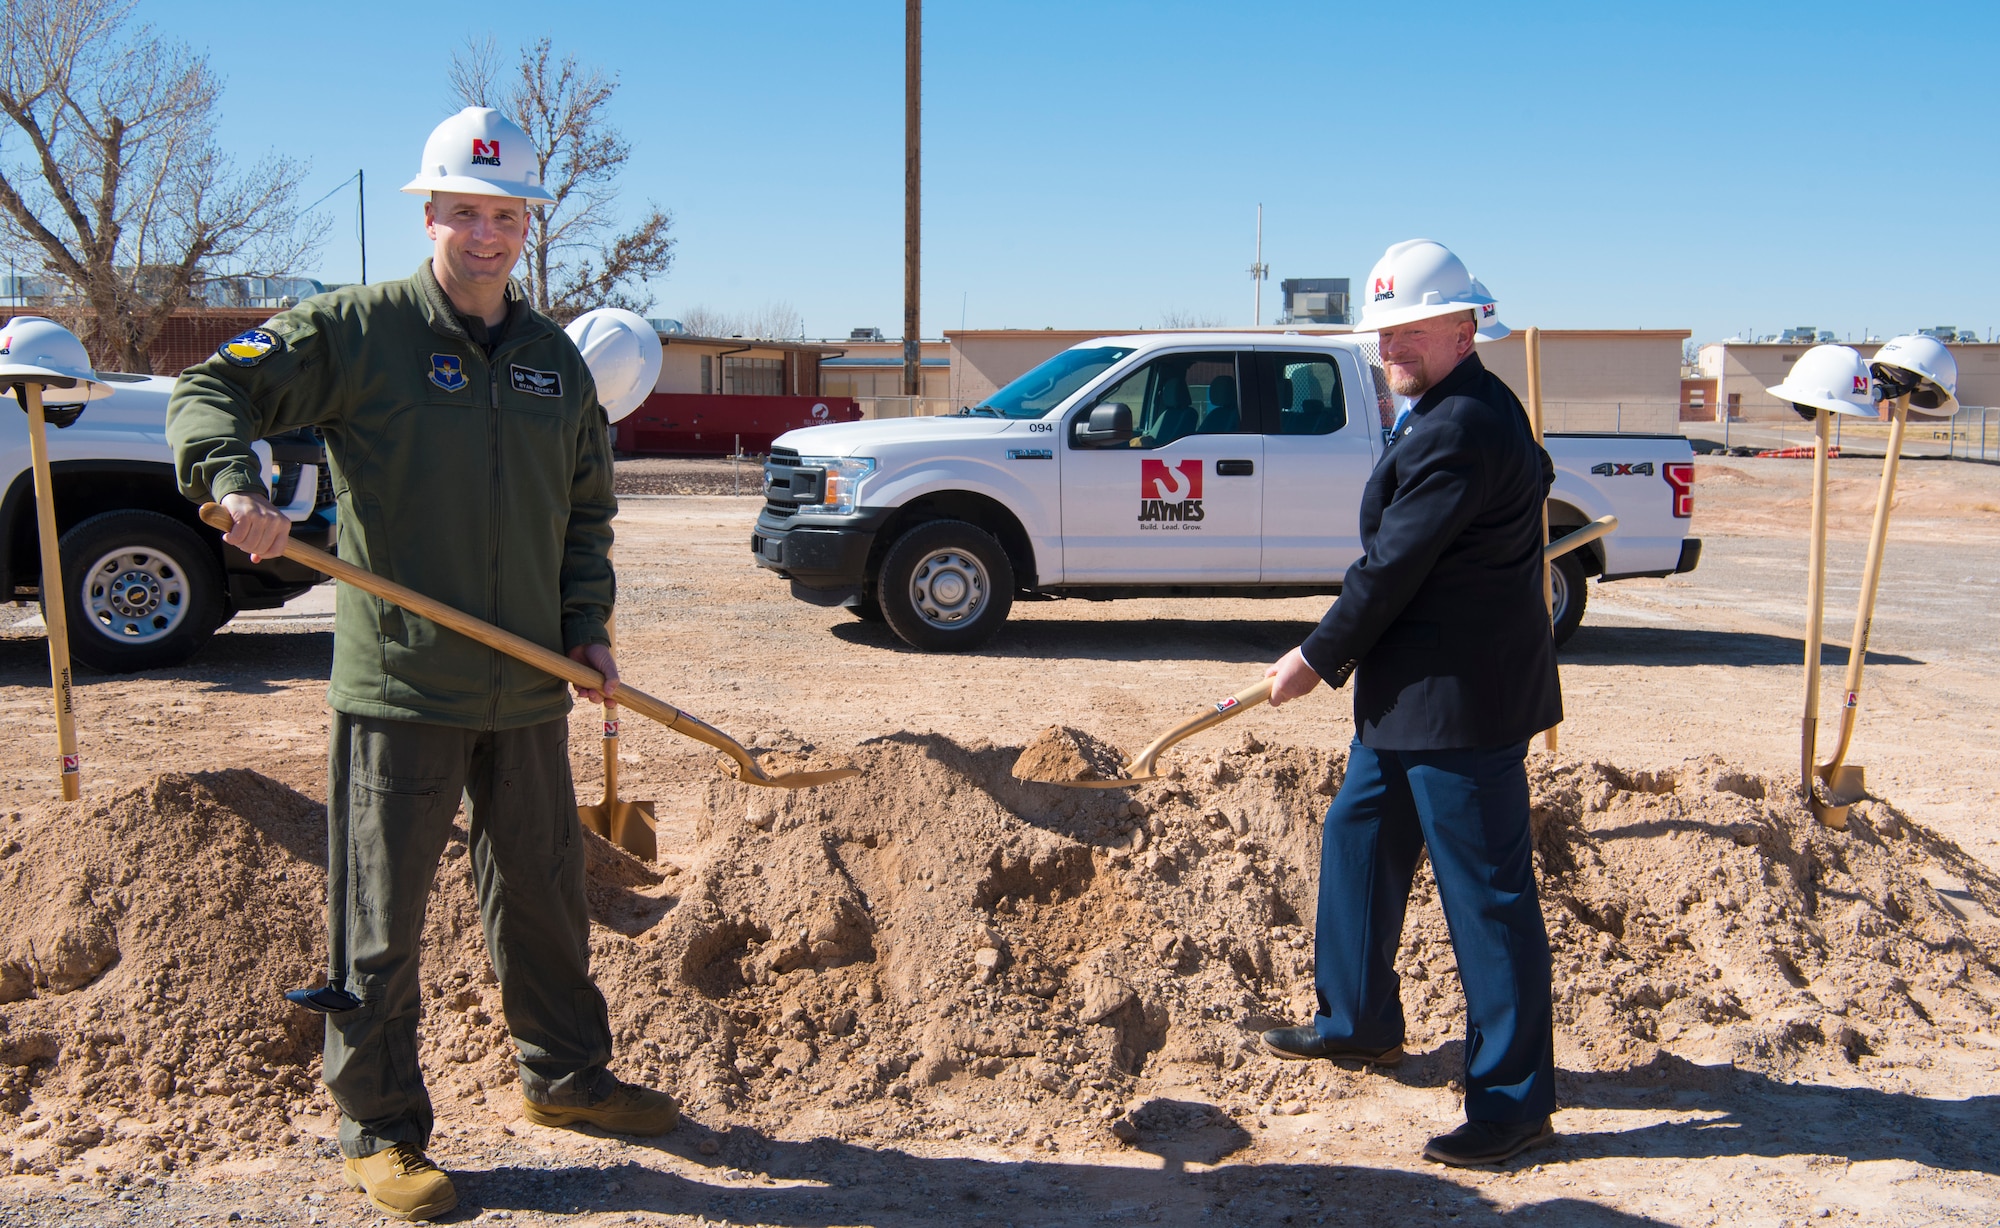 Col. Ryan Keeney, left, 49th Wing commander, and Jerrett Perry, Alamogordo Public School District superintendent, shovel dirt during a groundbreaking ceremony, Feb. 19, 2021, on Holloman Air Force Base, New Mexico. The purpose of the overall design of the school is to capture the essence of flight, to honor the men and women who are fighting for our country. (U.S. Air Force photo by Airman 1st Class Jessica Sanchez)